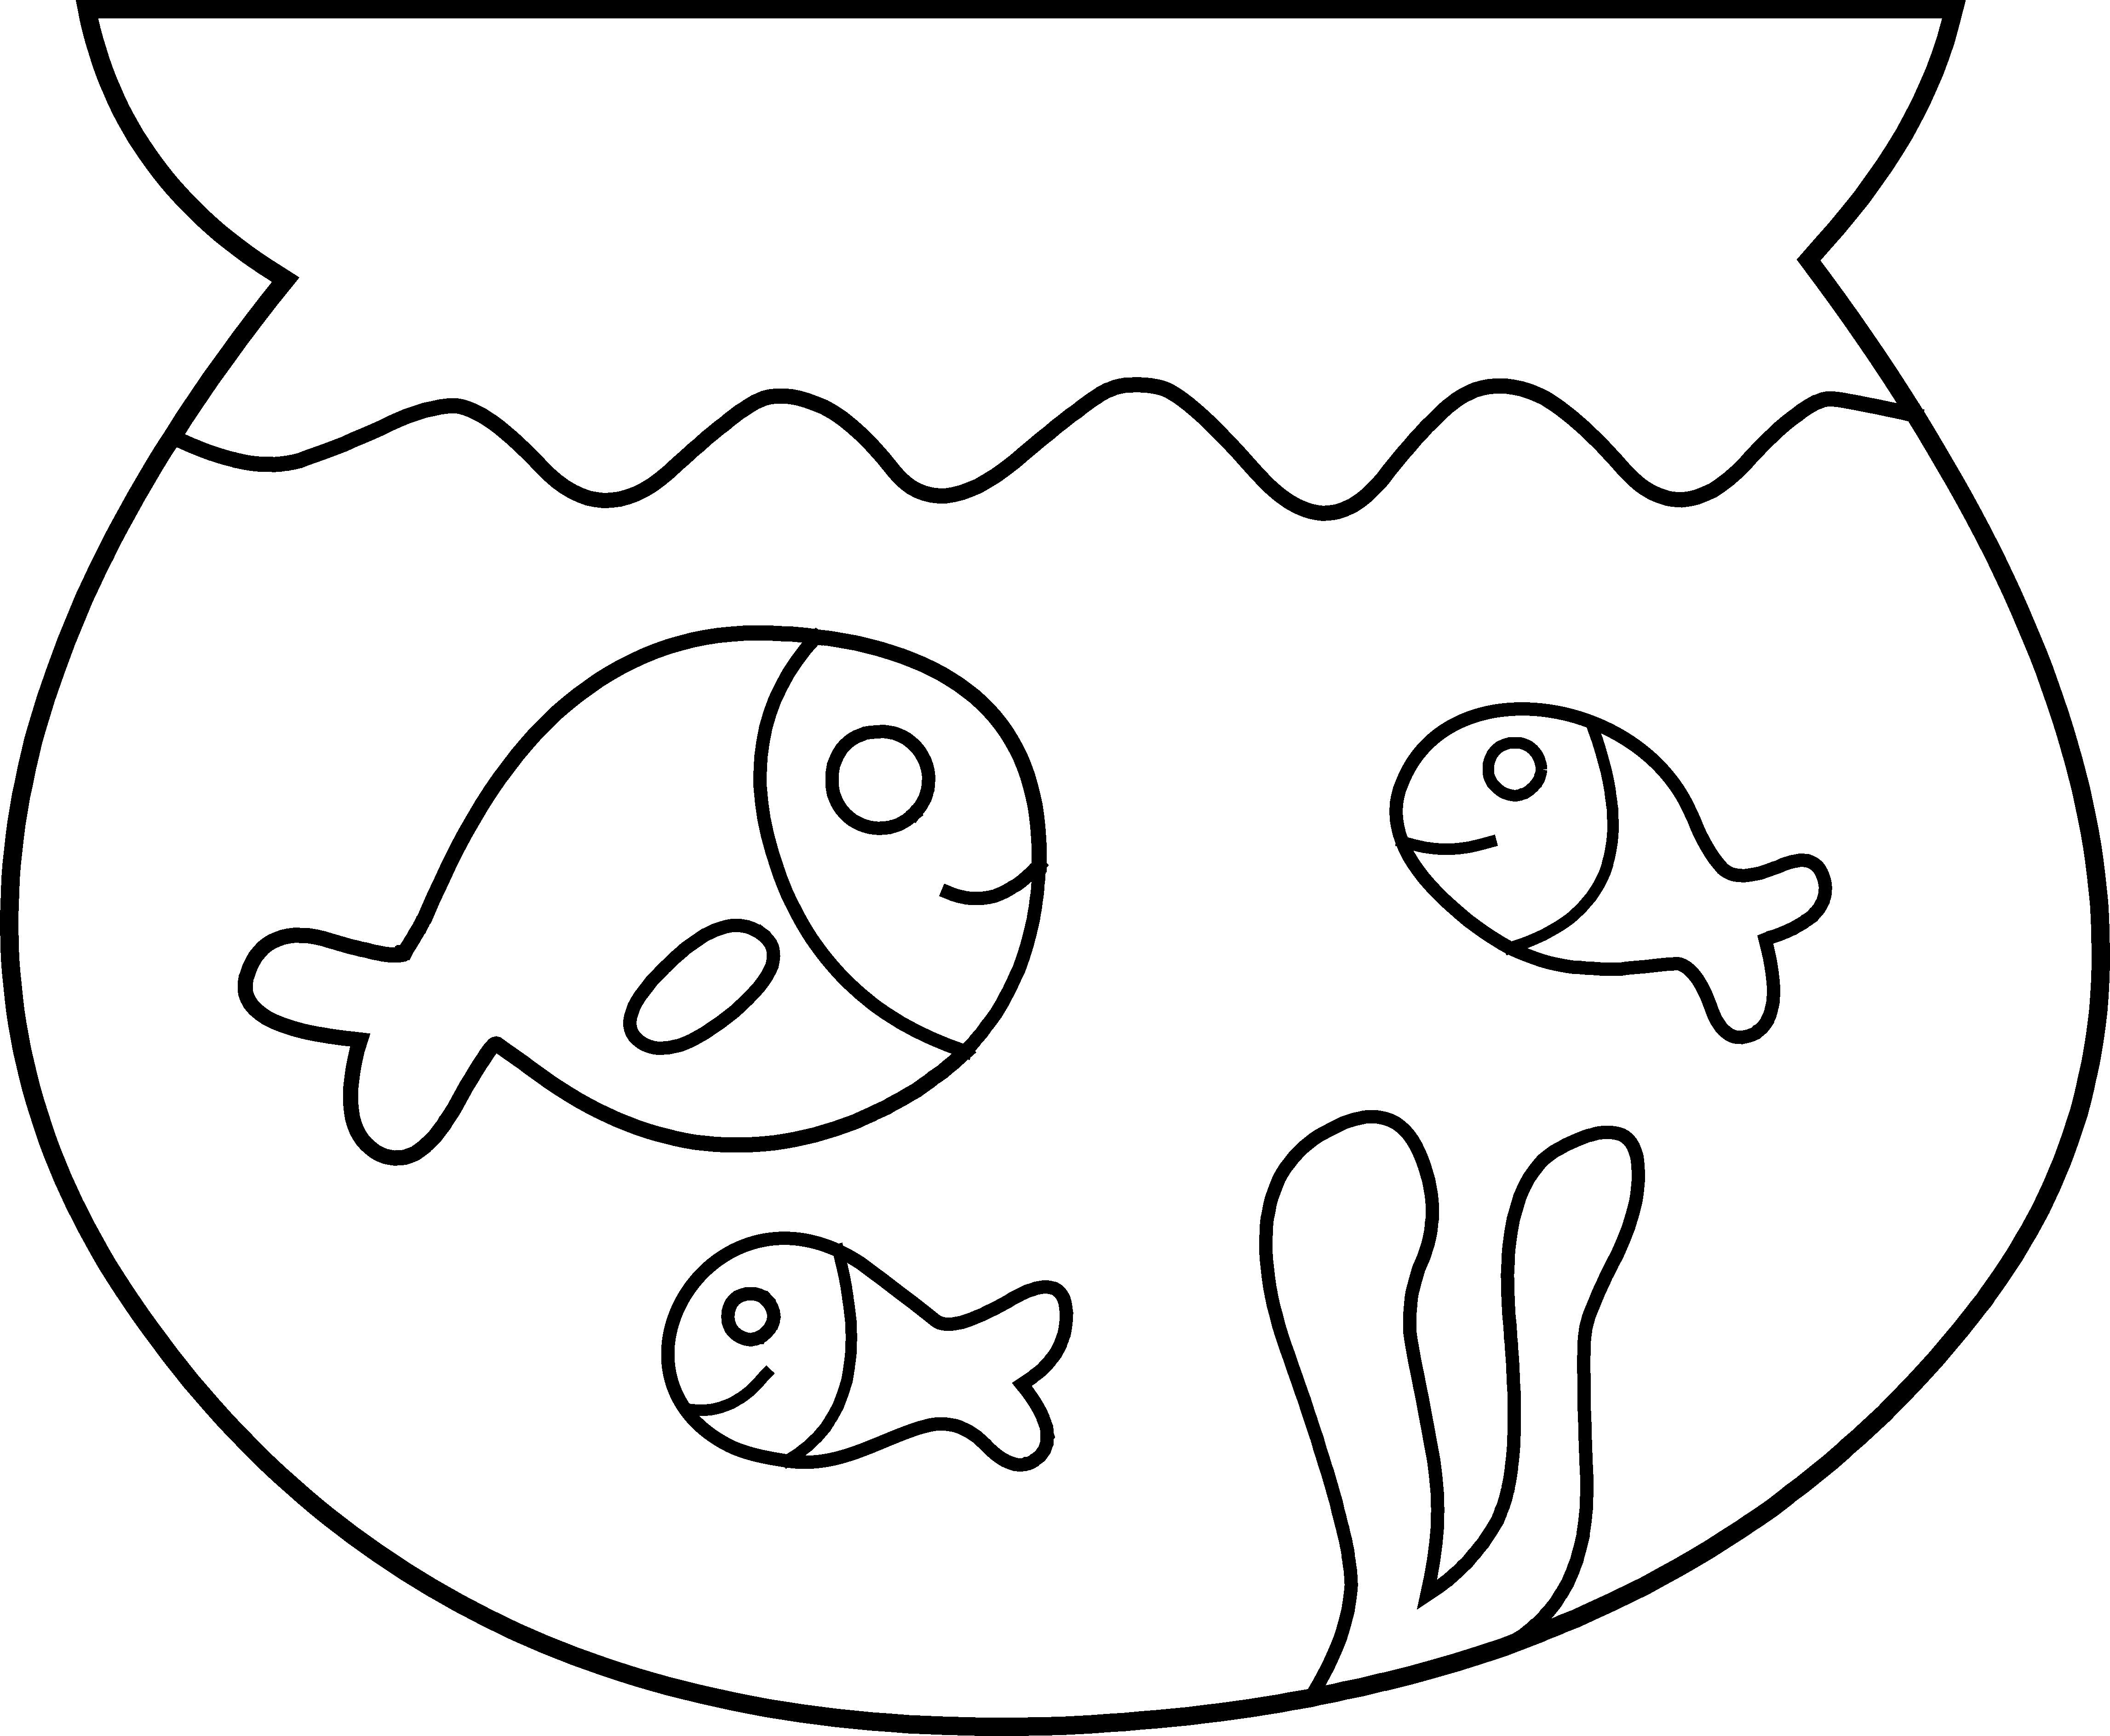 Picture Of A Fish Bowl - Cliparts.co